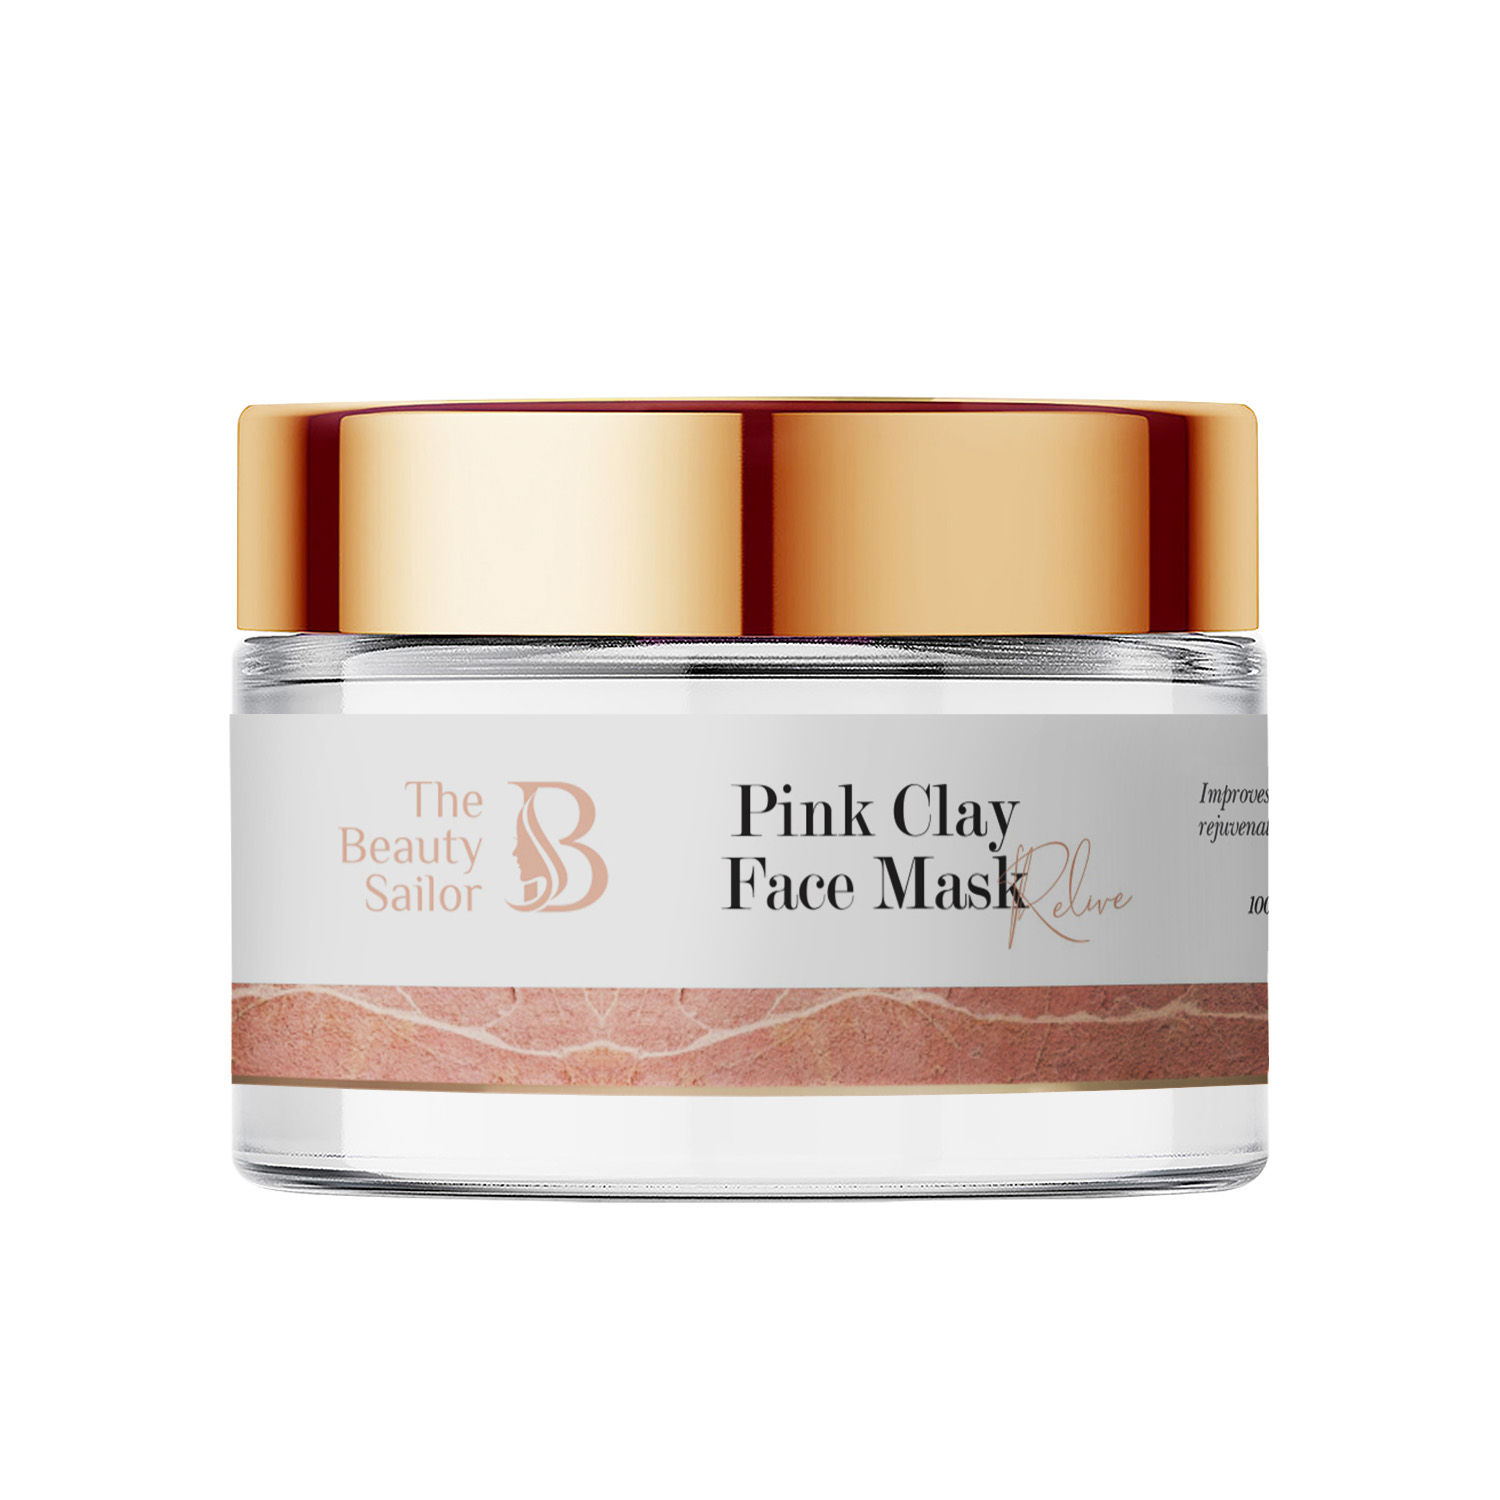 Buy The Beauty Sailor Anti Aging Pink Clay Face Mask for Natural Glow, Anti Wrinkle Face Mask With Avocado oil, Kaolin, Pink clay, Vitamin C & E - (100 g) - Purplle